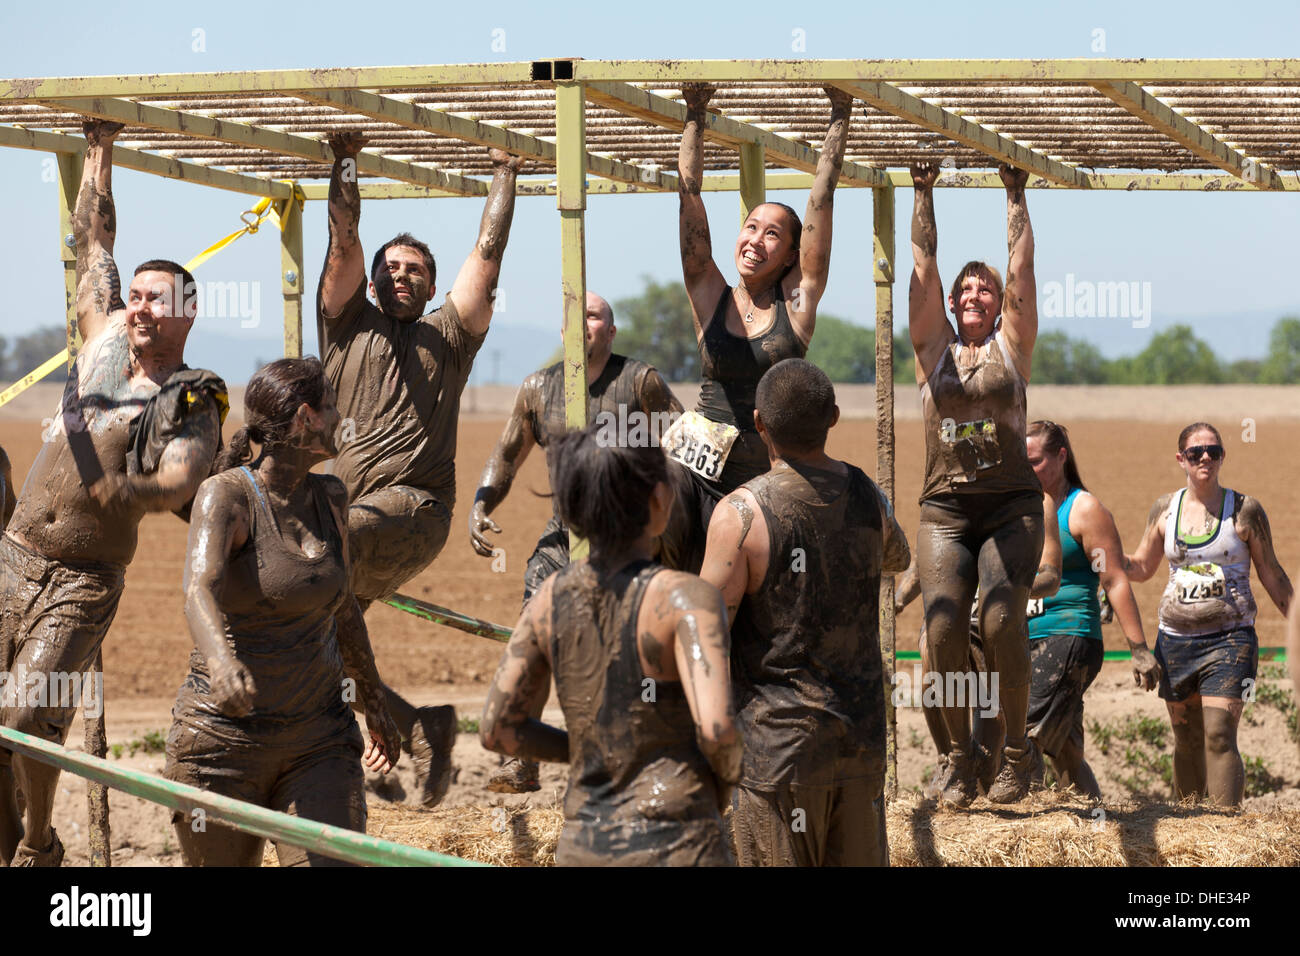 Mud run participants on obstacle course - California USA Stock Photo